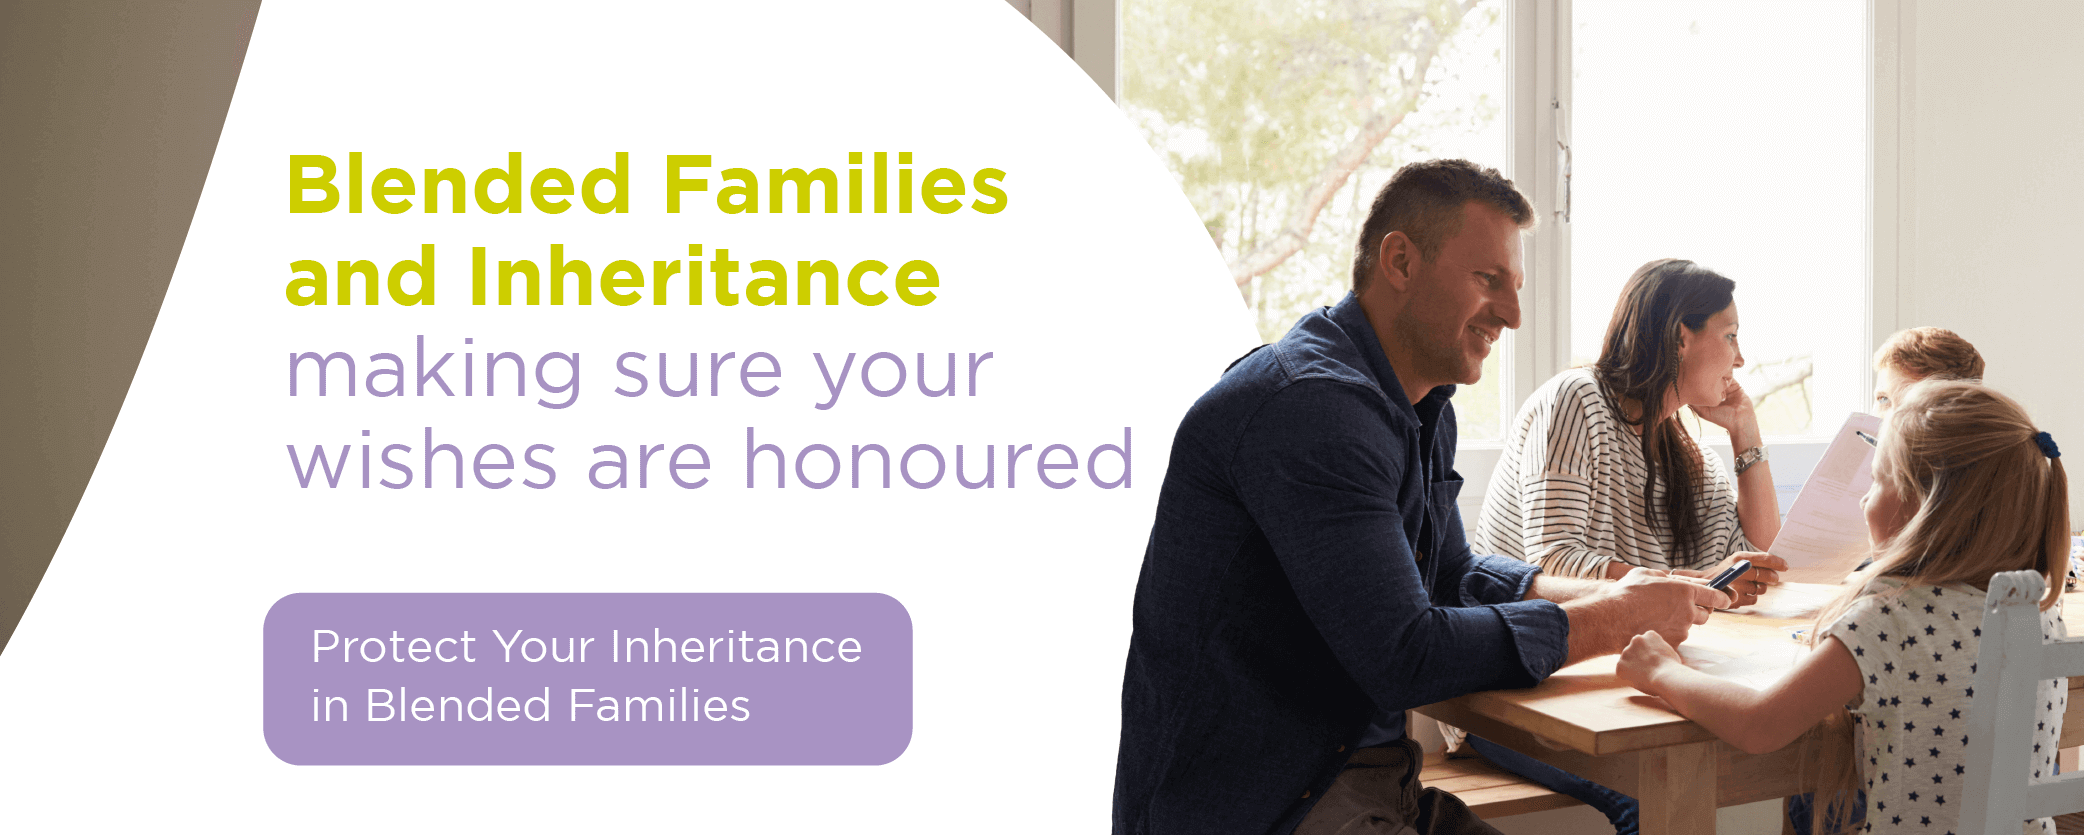 Blended Families and Inheritance: making sure your wishes are honoured